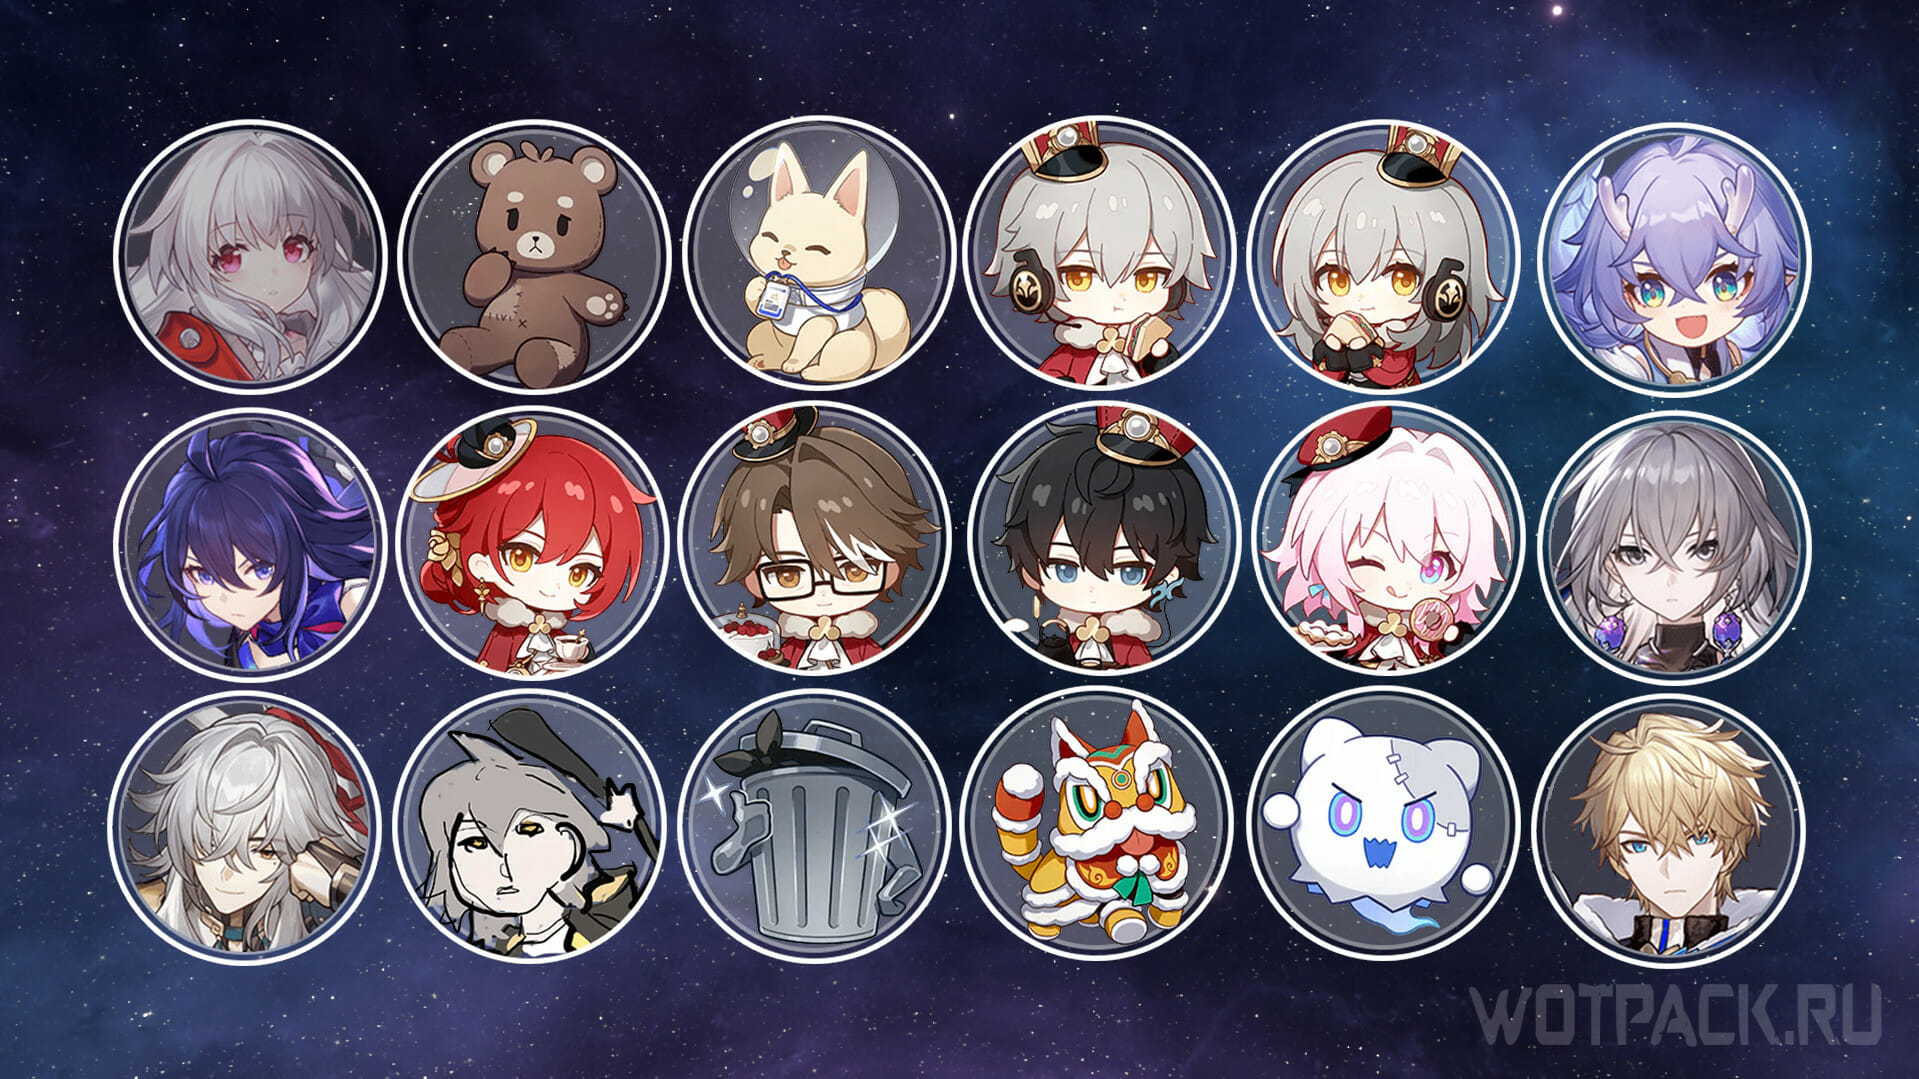 Avatars In Honkai Star Rail: How To Get All Profile Pictures